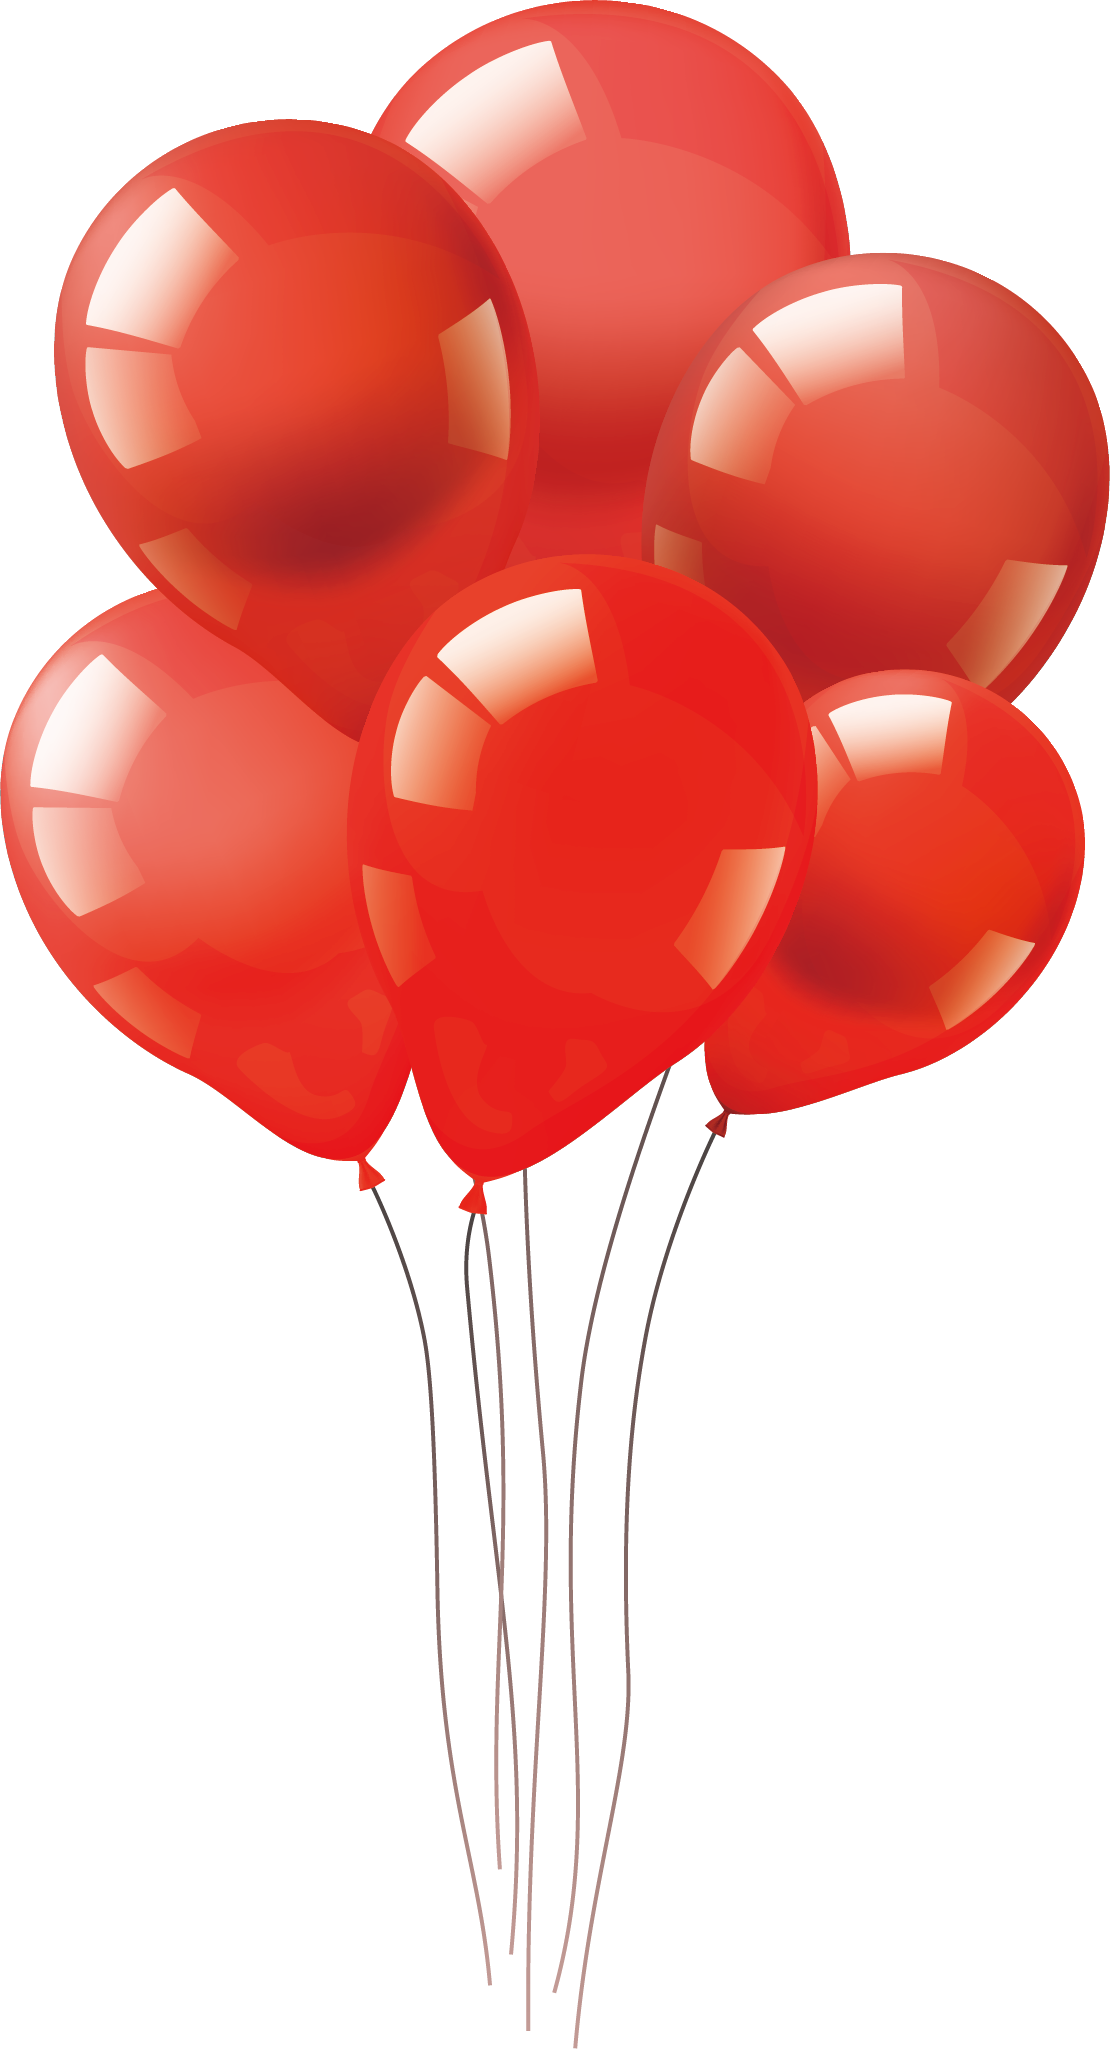 Red Balloon PNG Image